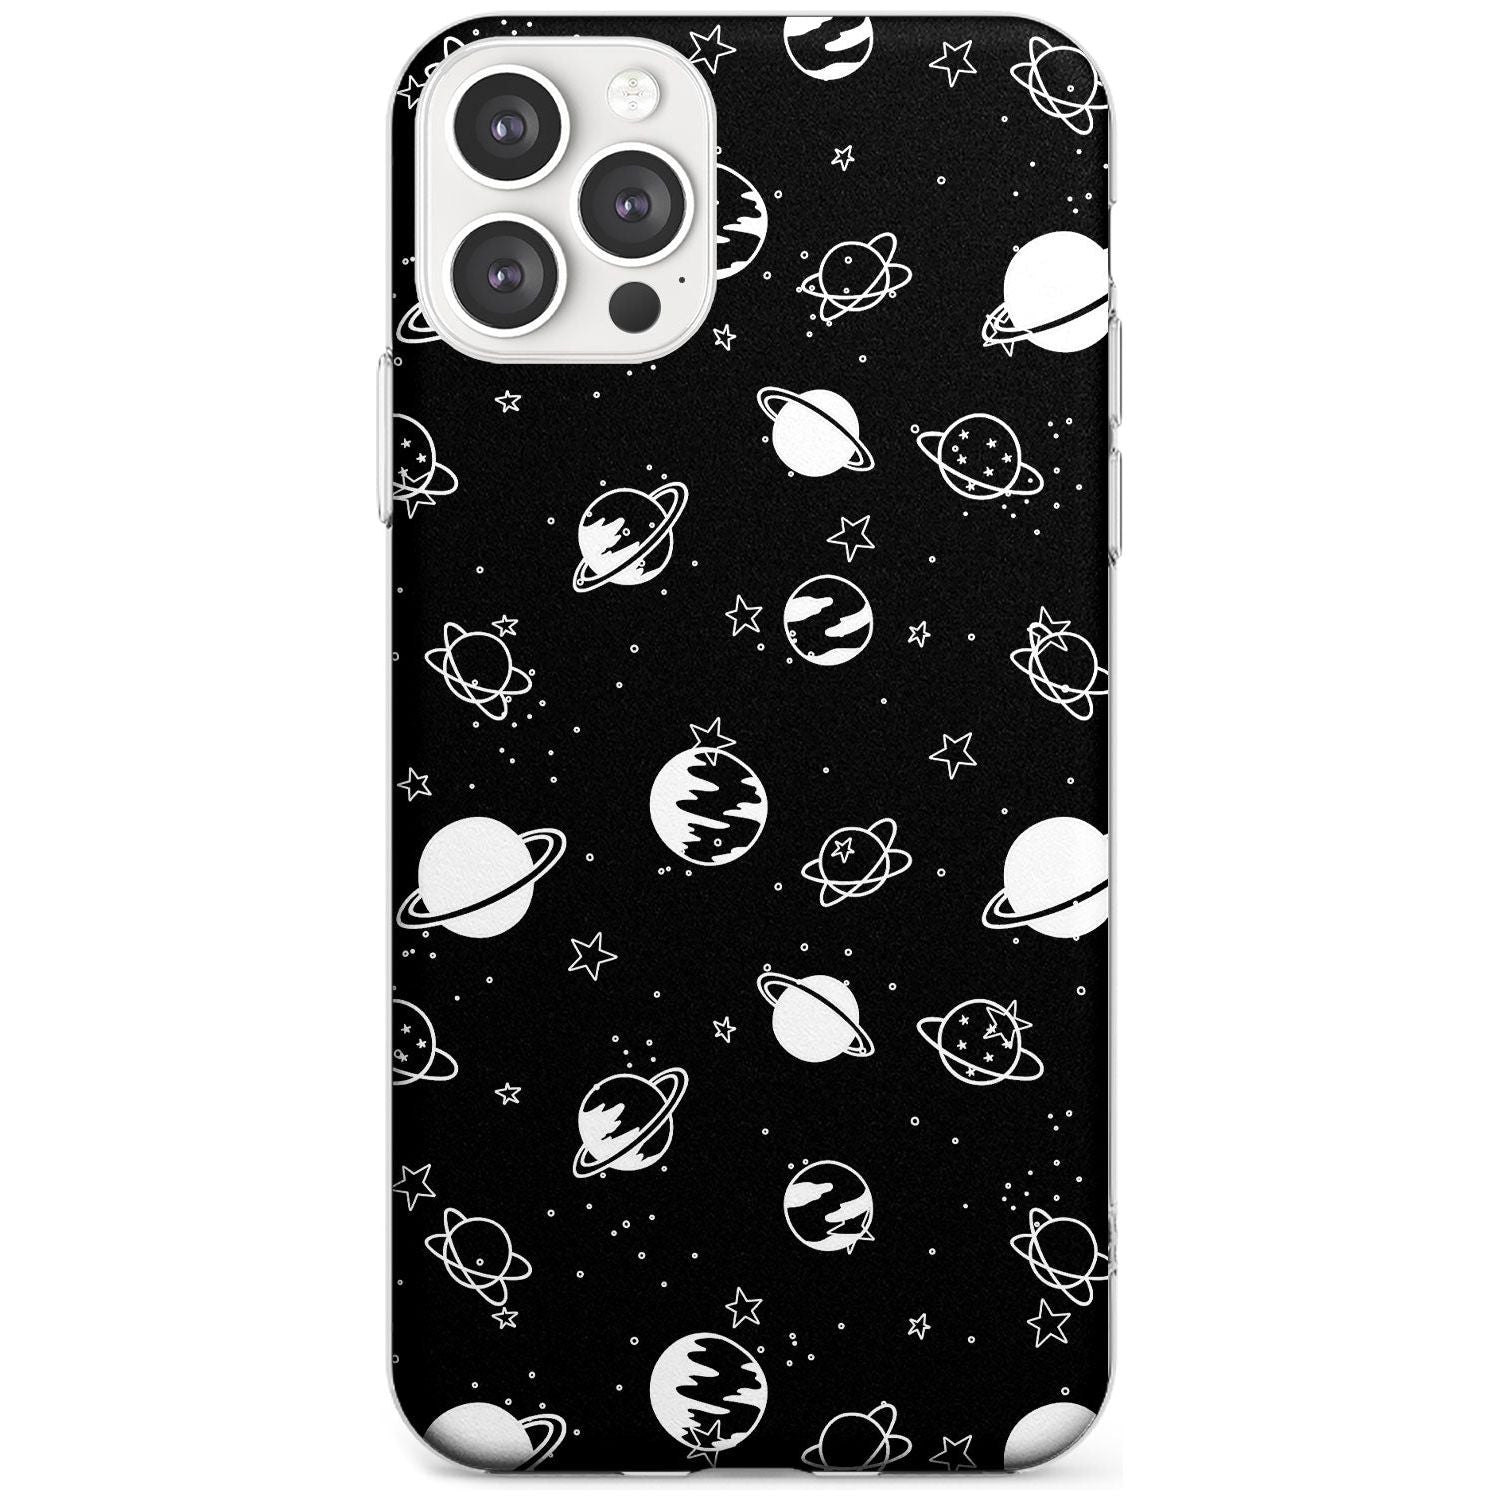 White Planets on Black Black Impact Phone Case for iPhone 11 Pro Max